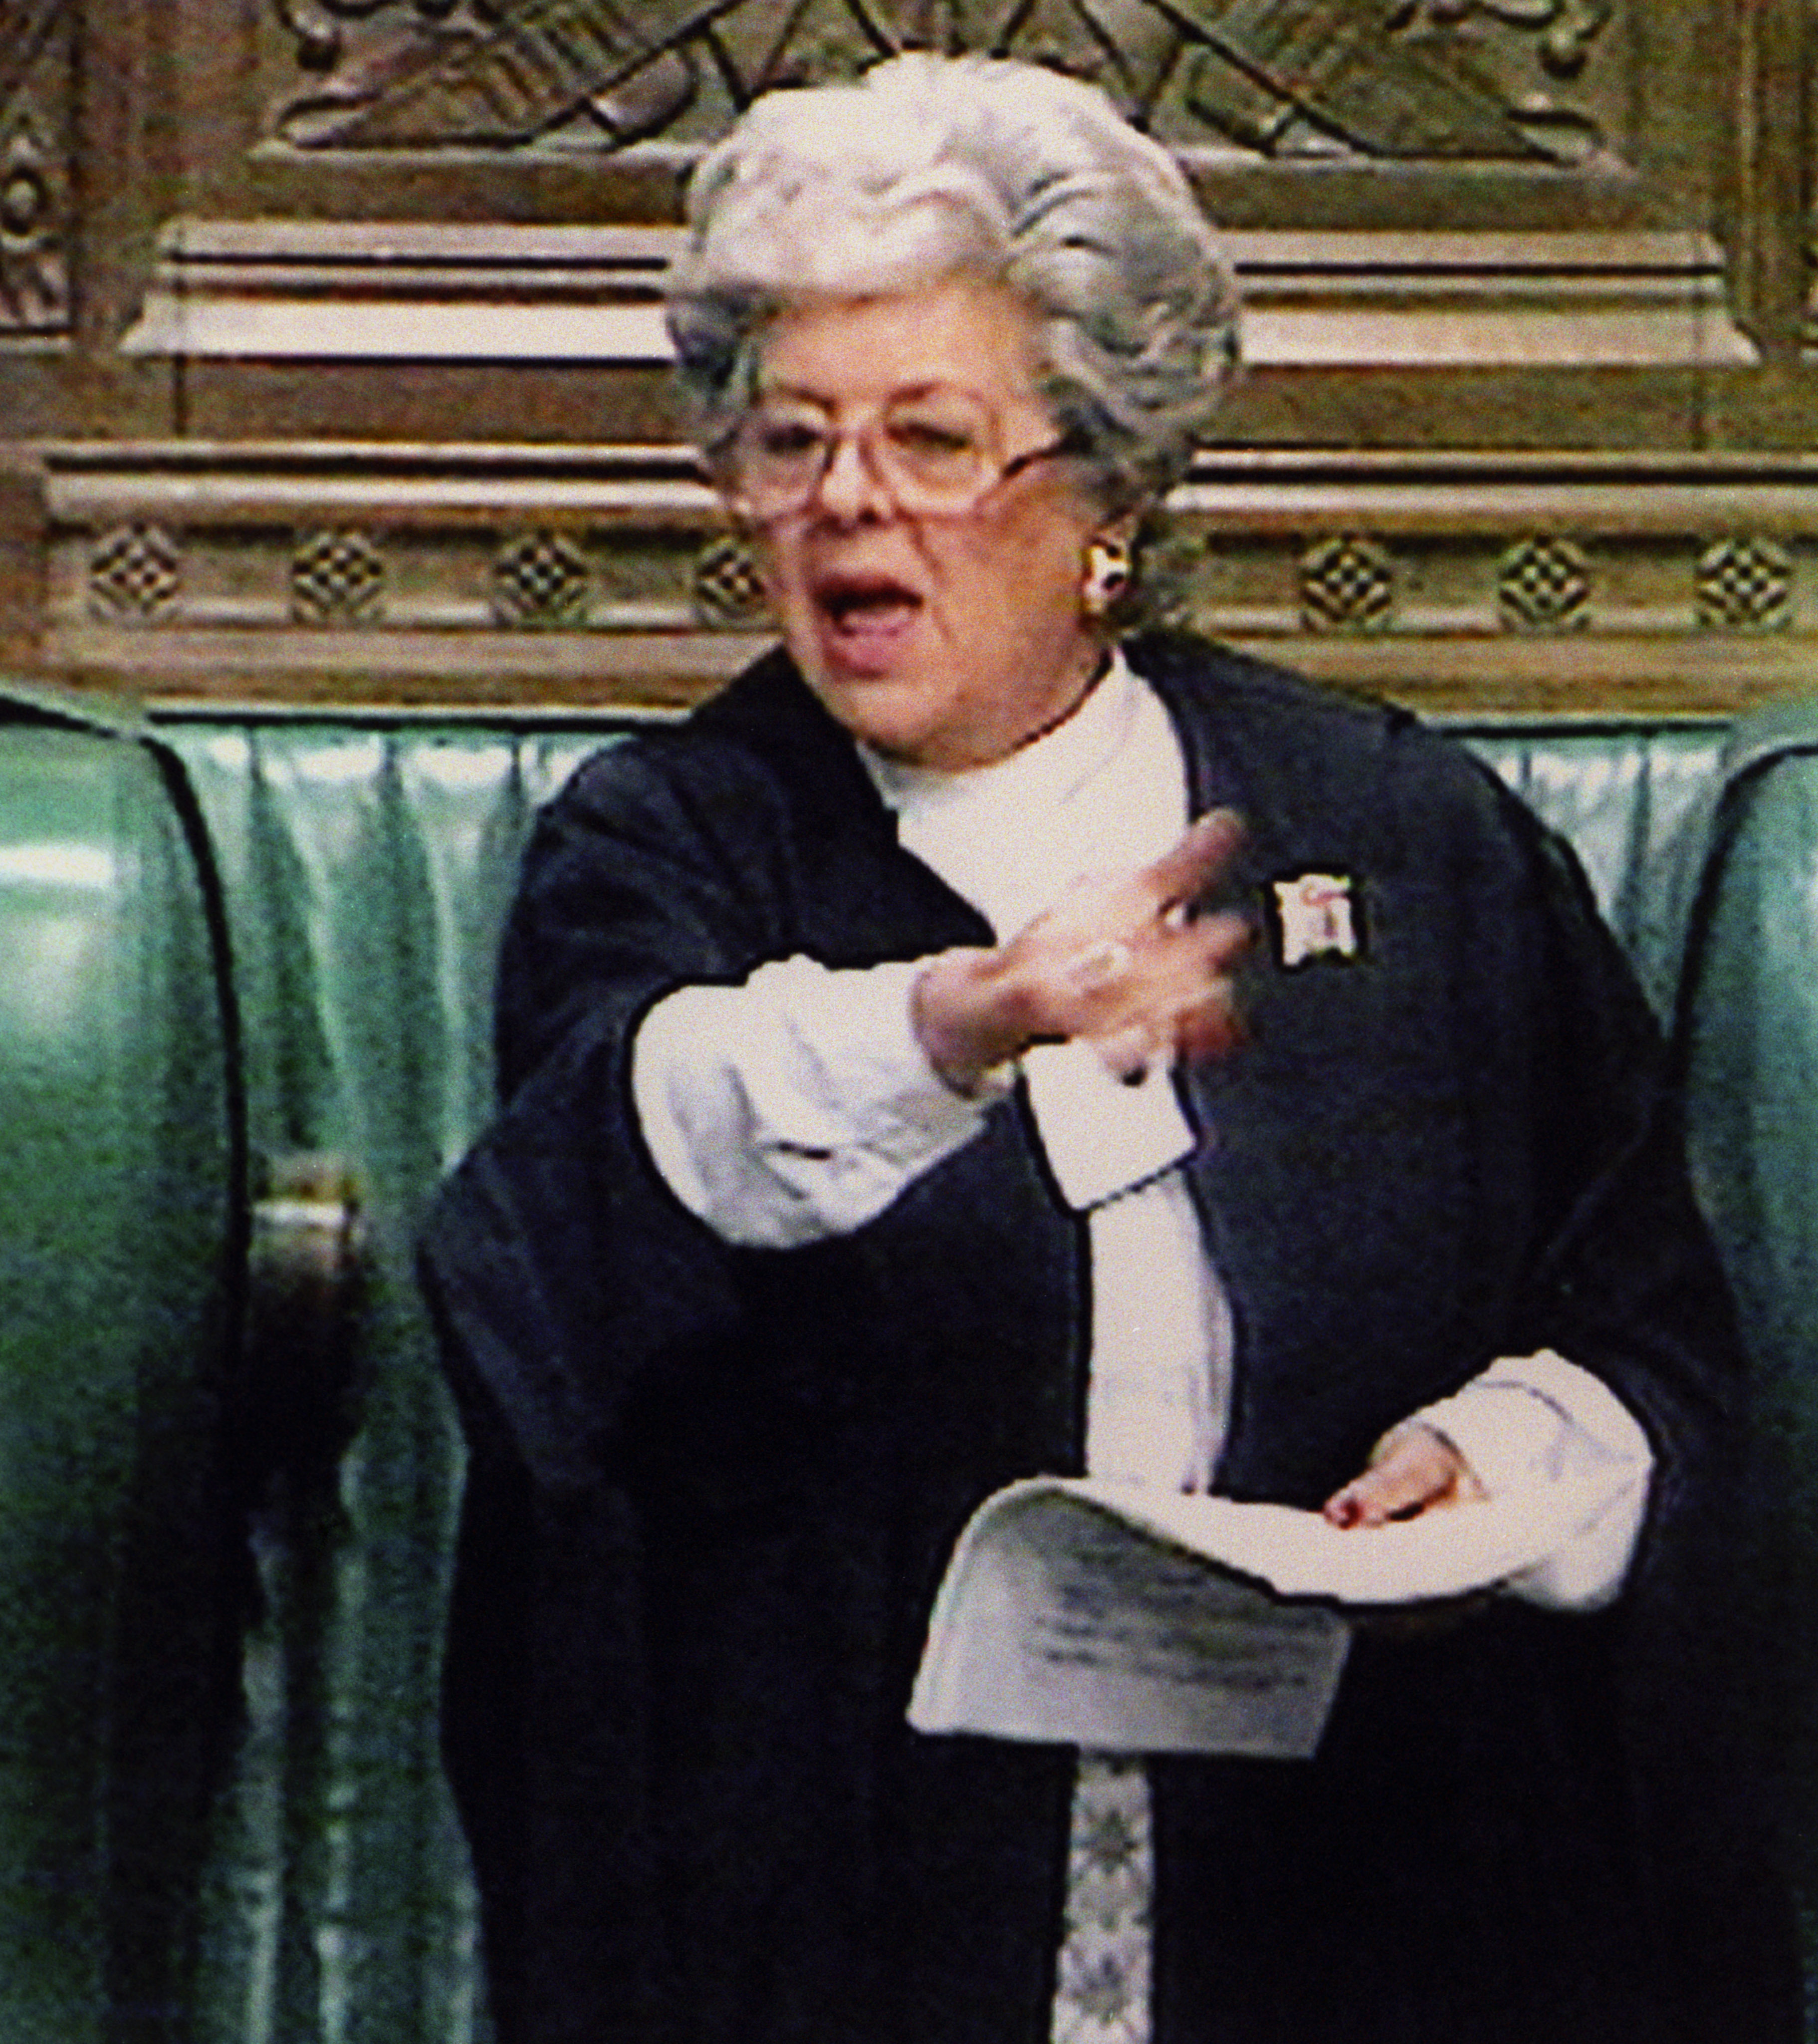 Baroness Betty Boothroyd died aged 93